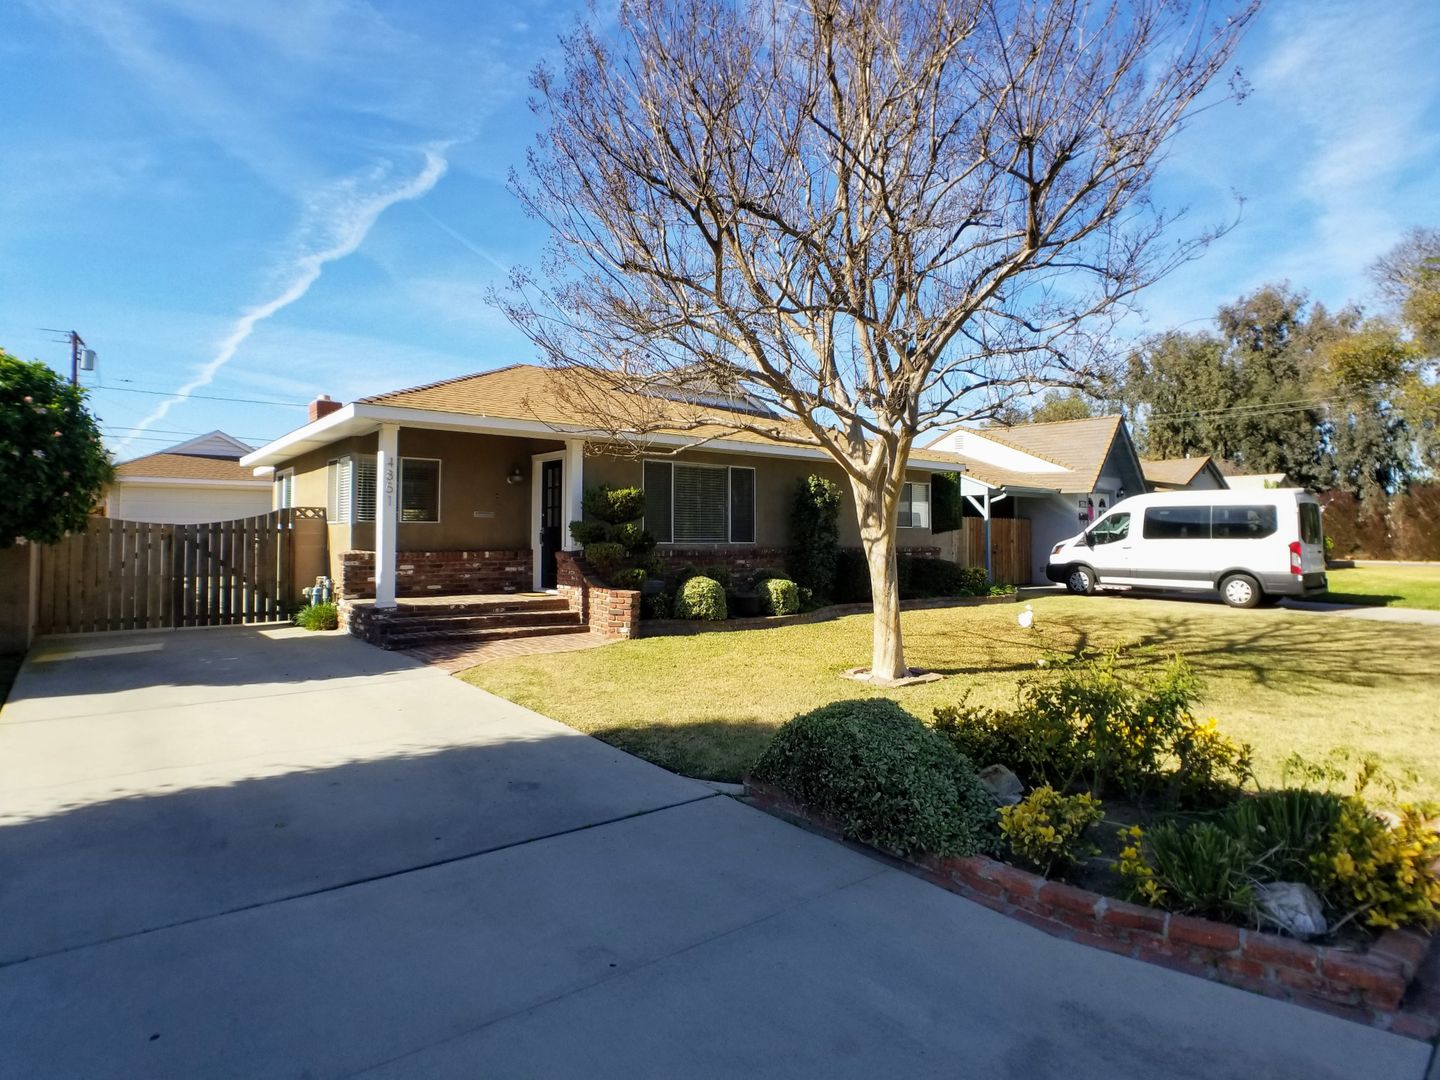 Property Listing For 01/18/2021